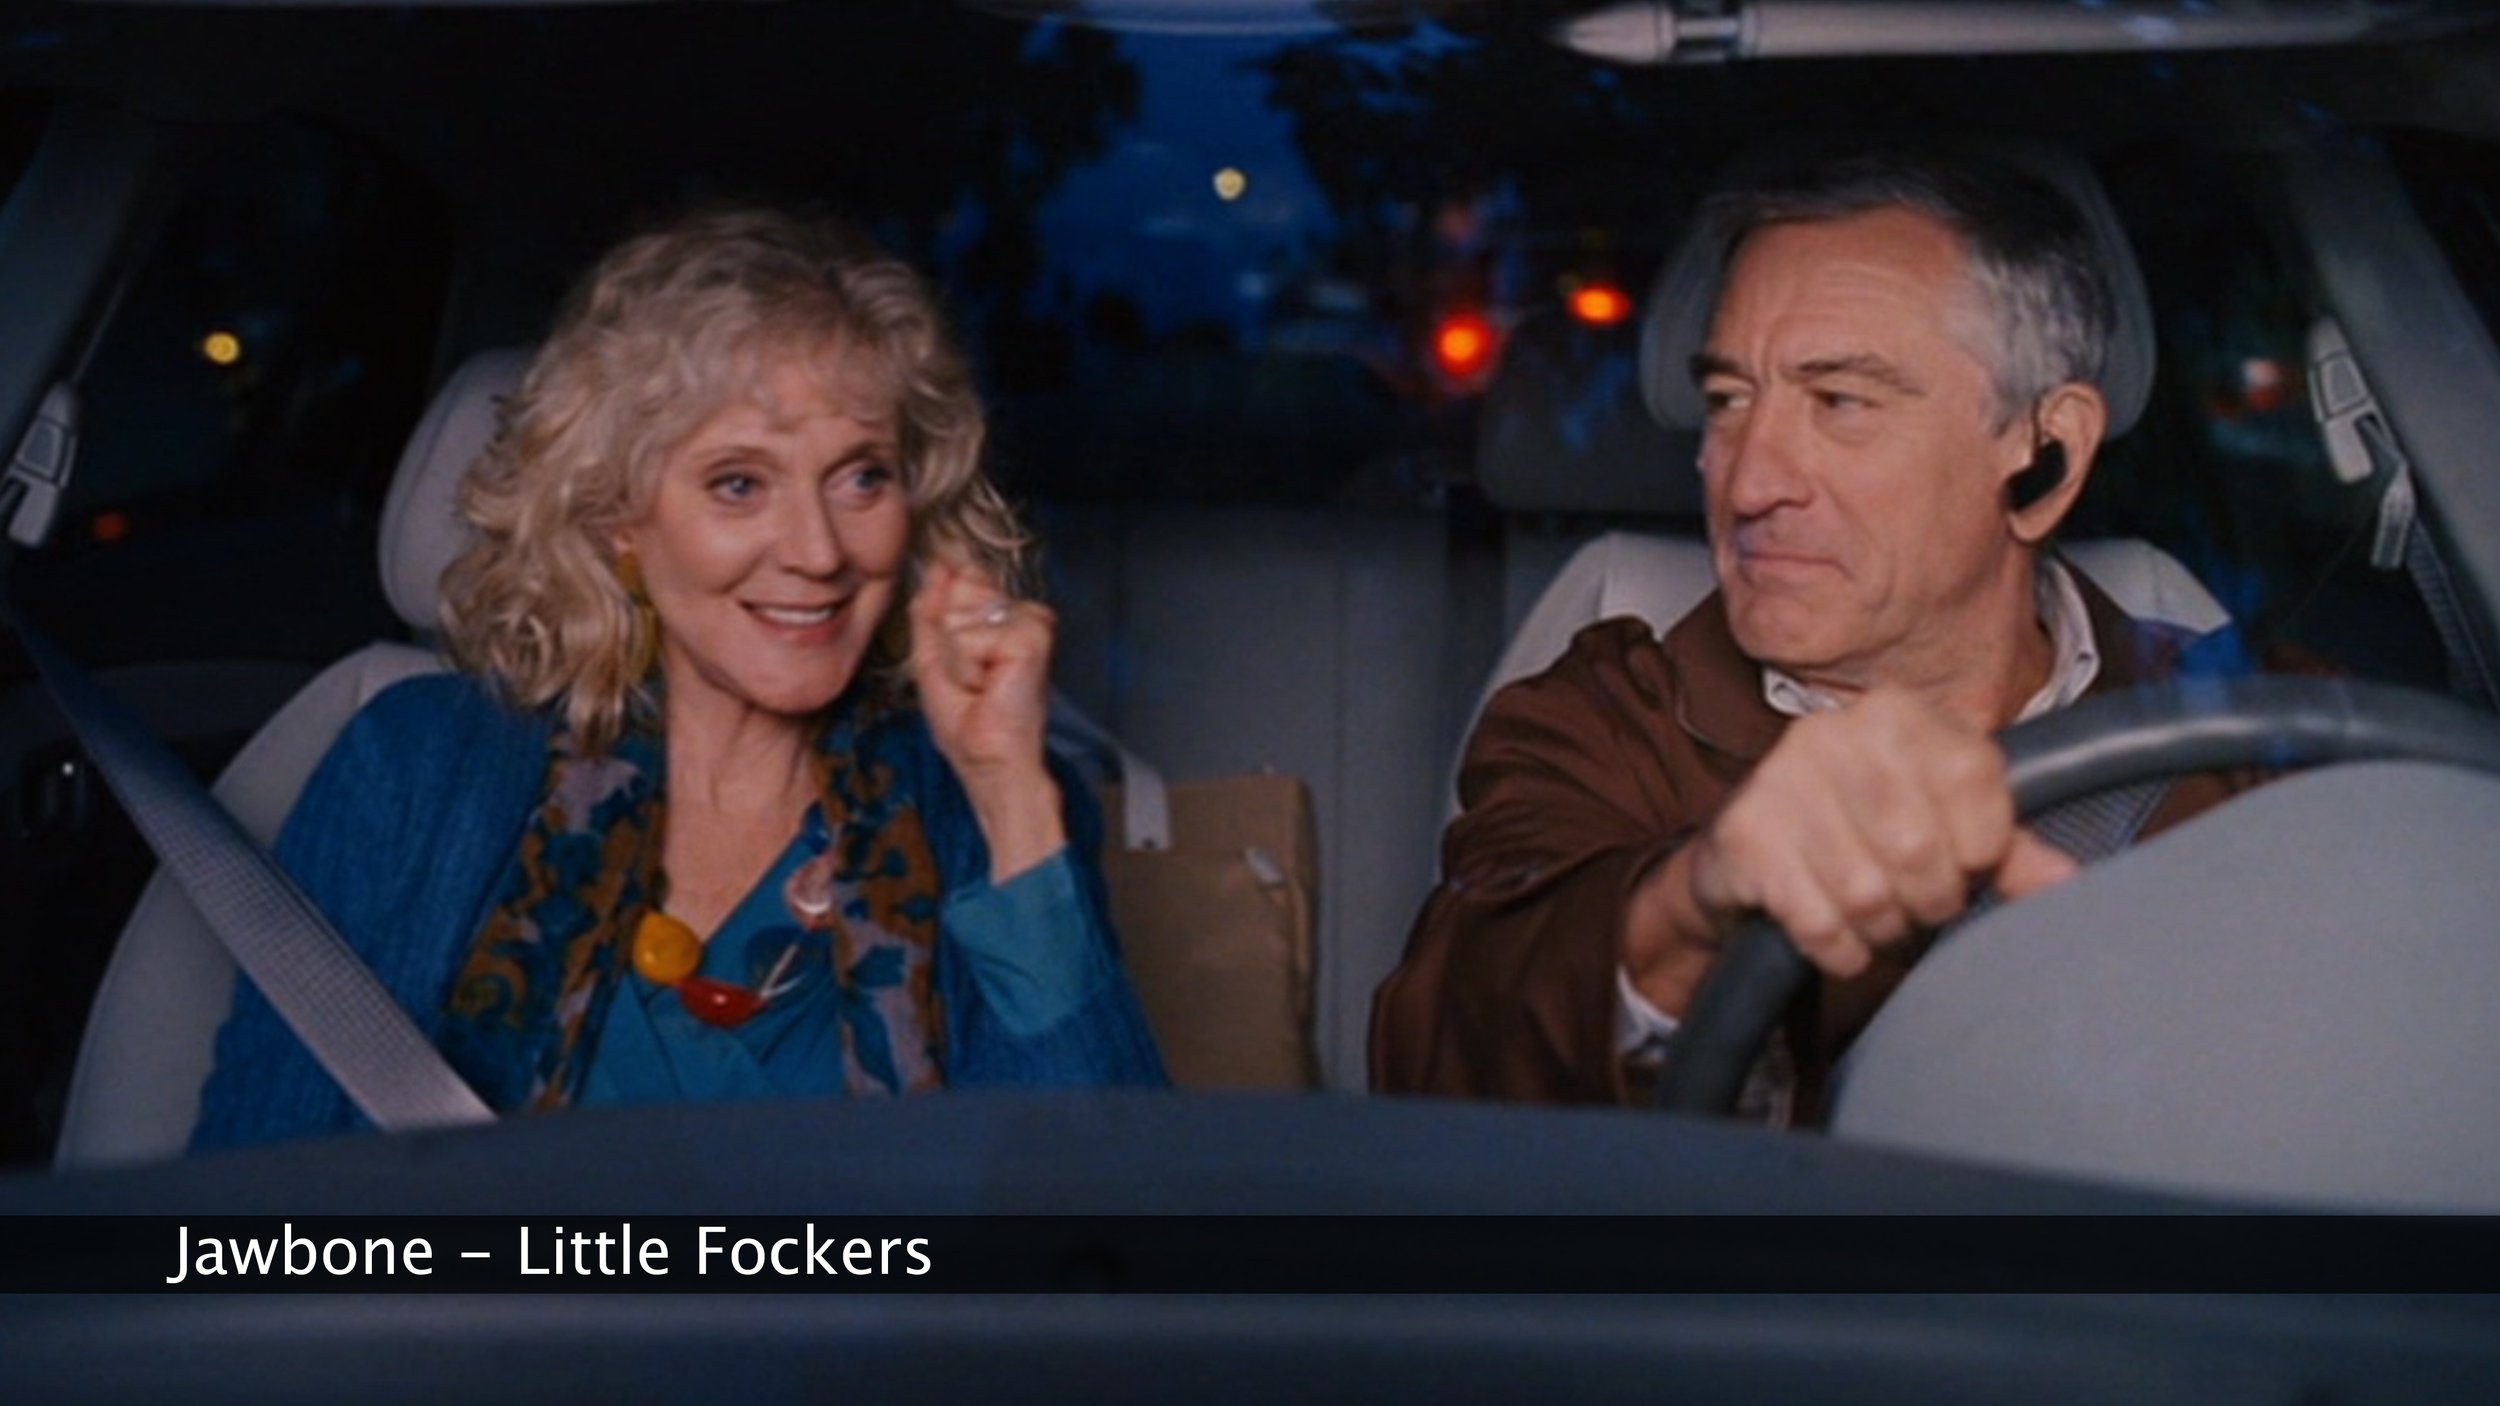 Jawbone Product Placement - Little Fockers Movie